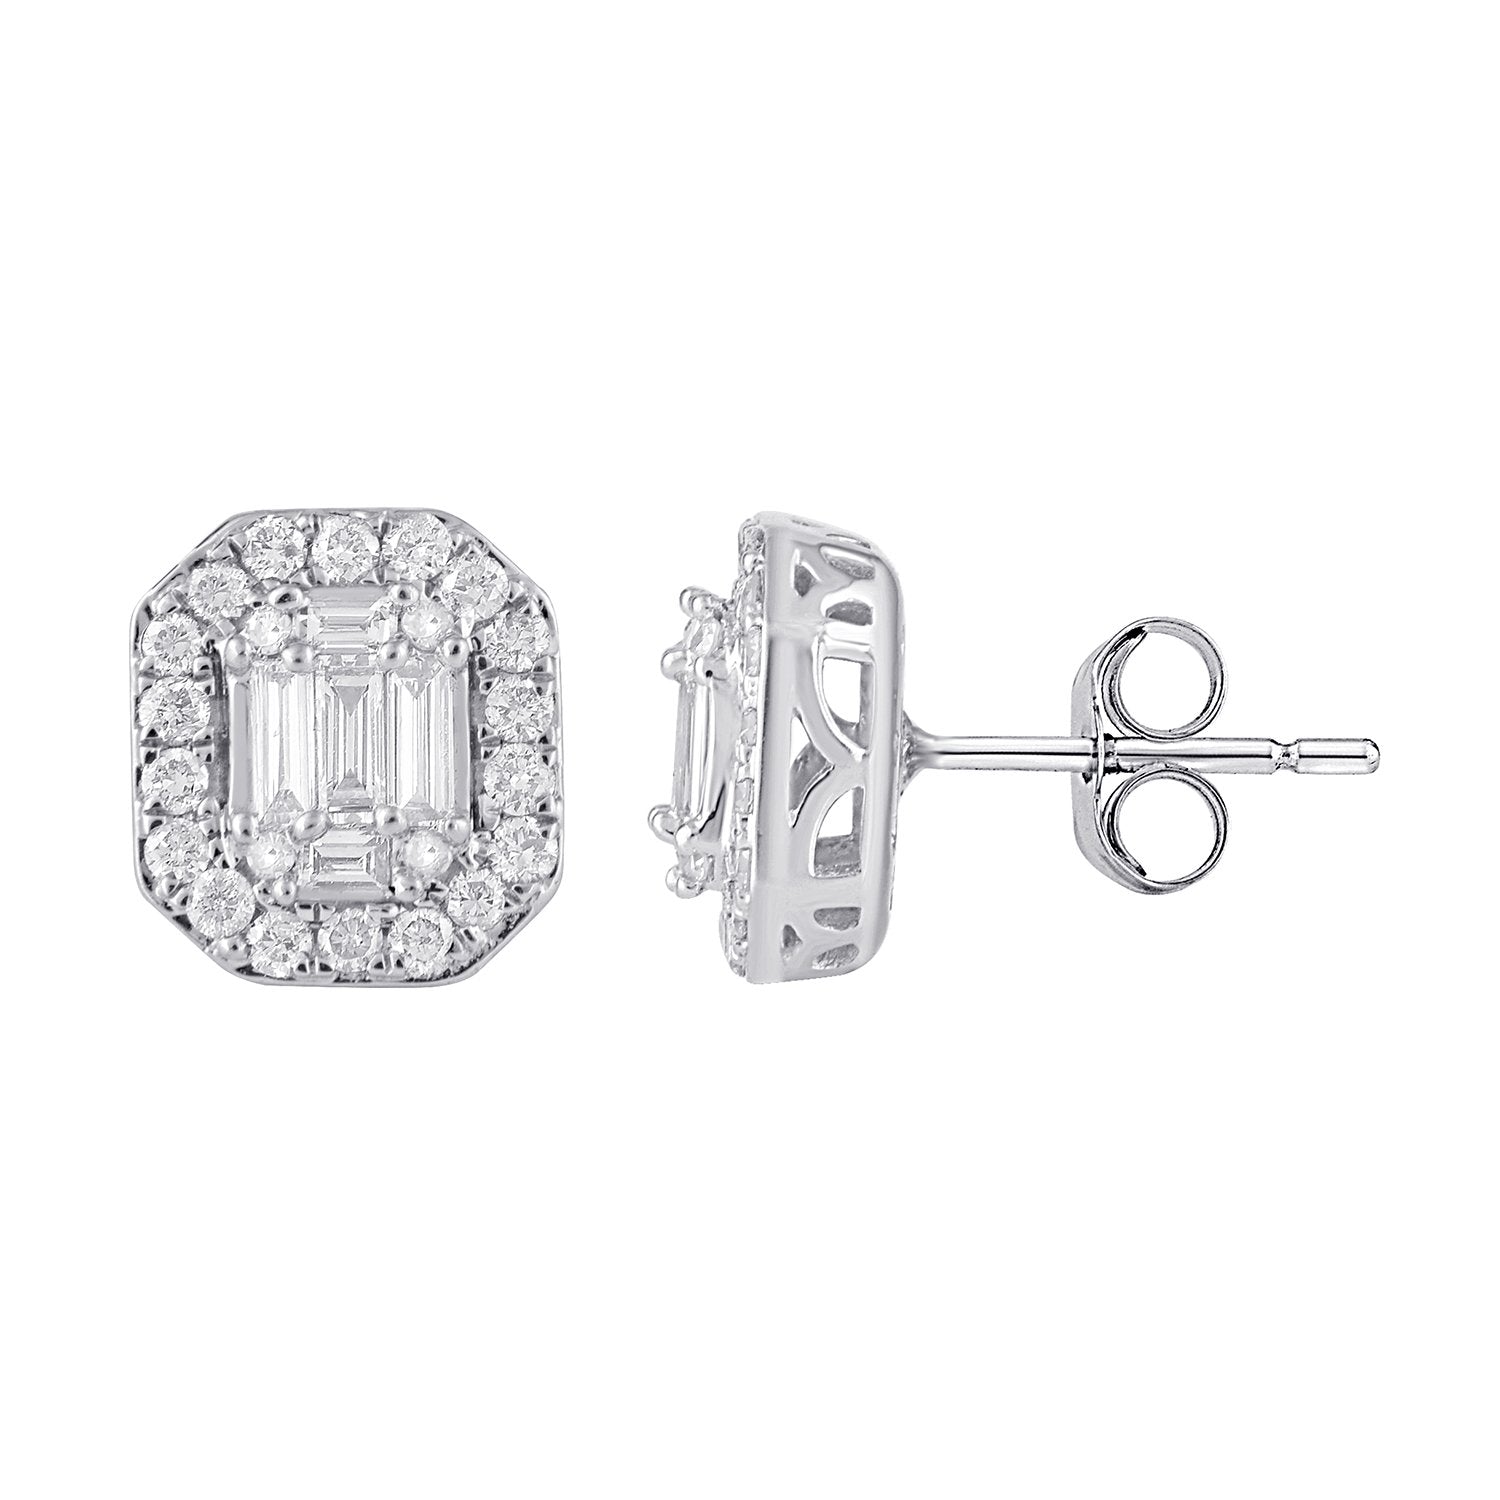 Brilliant Claw Surround Stud Earrings with 1/2ct of Diamonds in 9ct White Gold Earrings Bevilles 